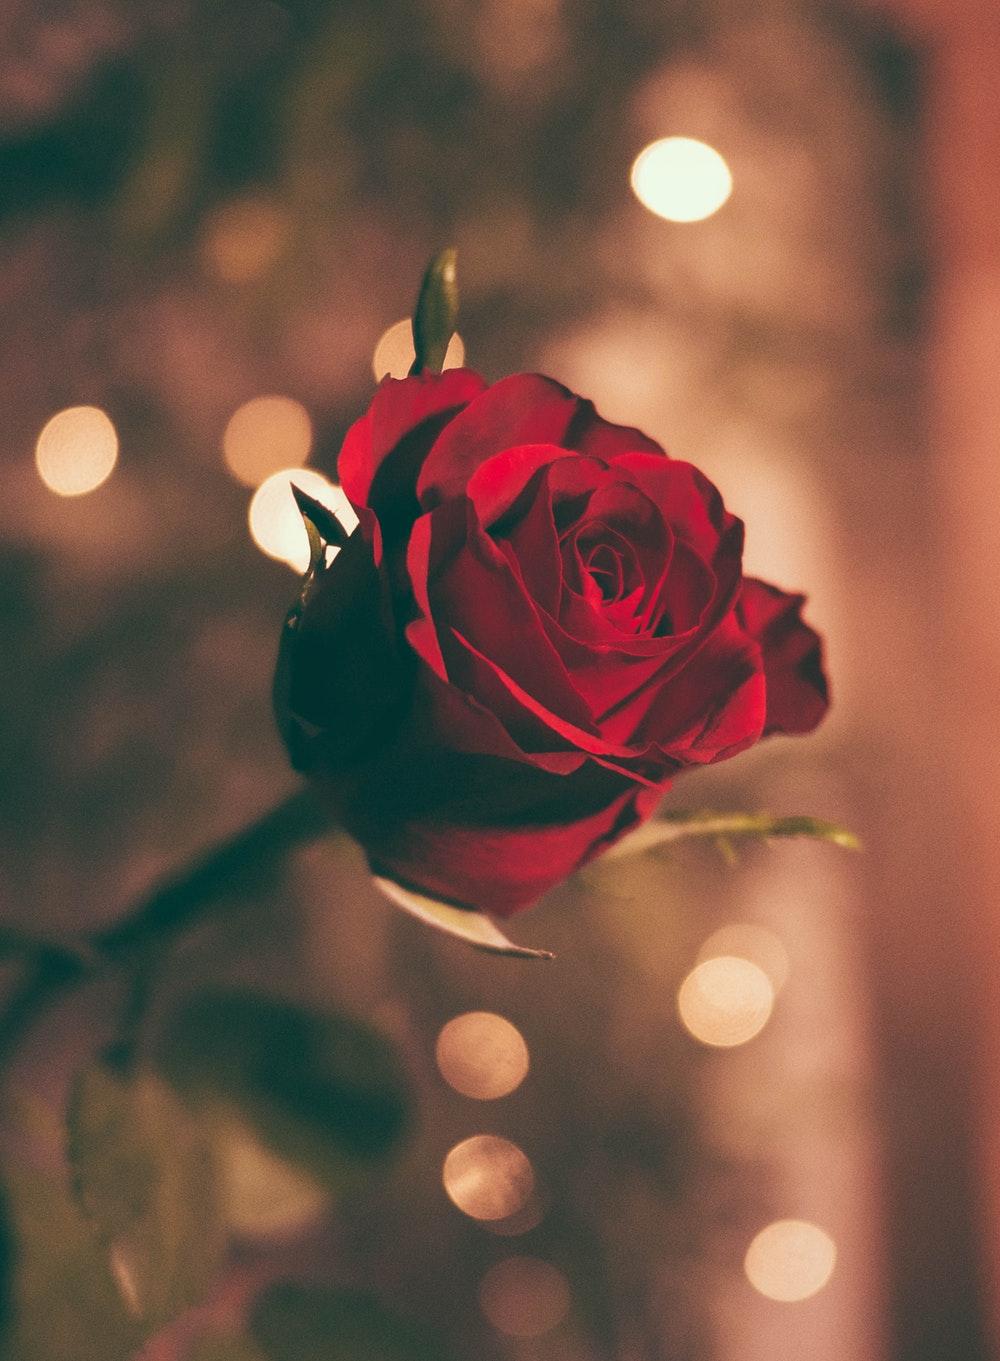 Single Rose Picture. Download Free Image